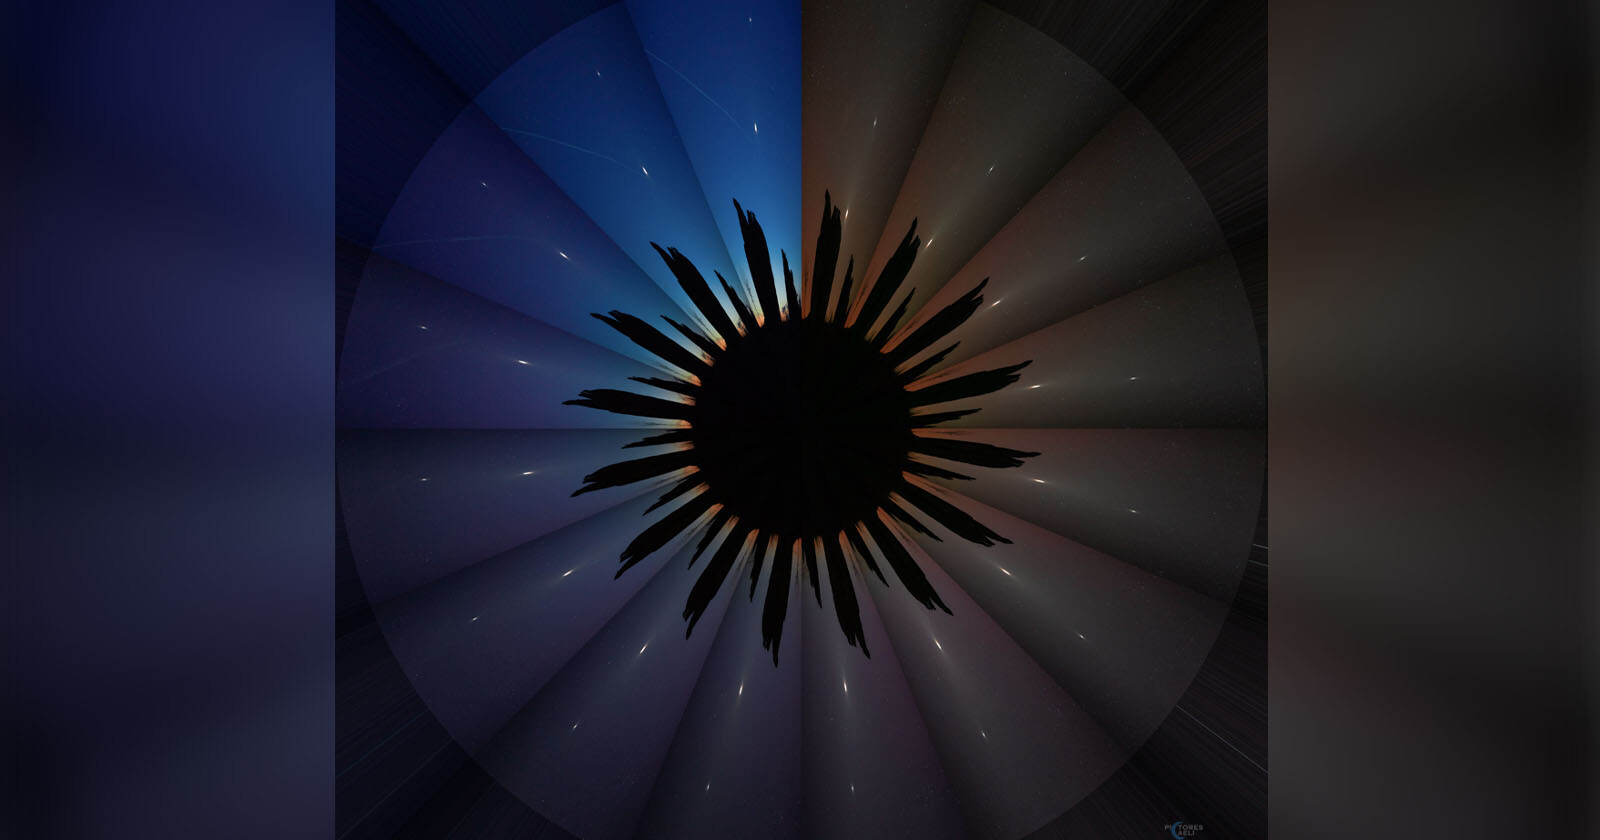 Photographers Stellar Flower Shows Night Sky Changes in 360 Degrees